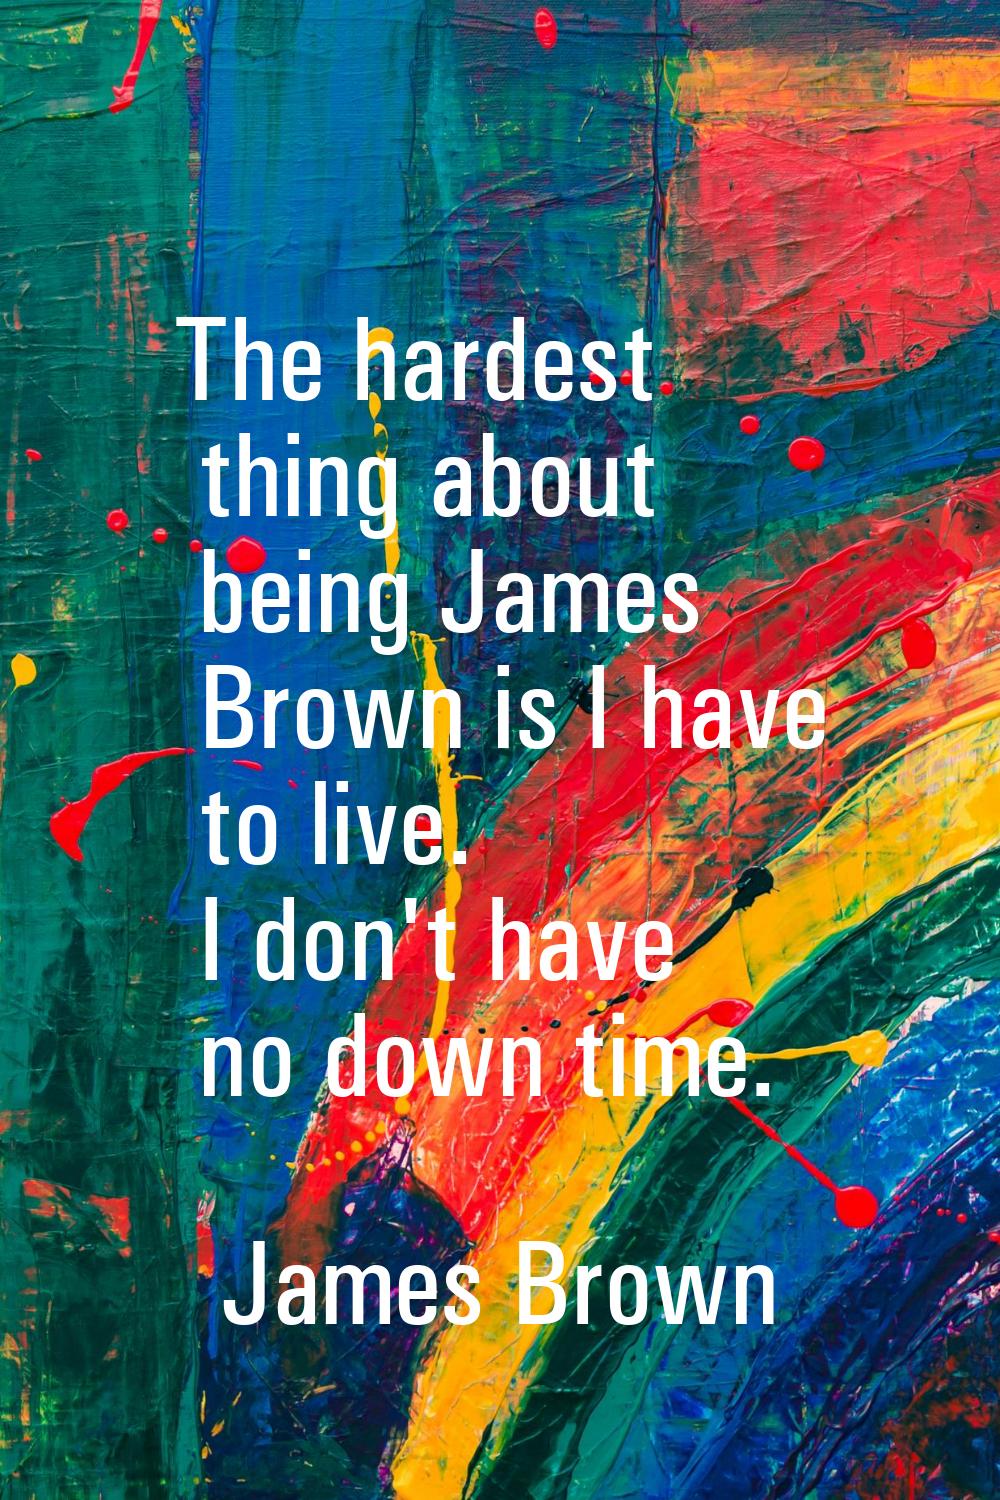 The hardest thing about being James Brown is I have to live. I don't have no down time.